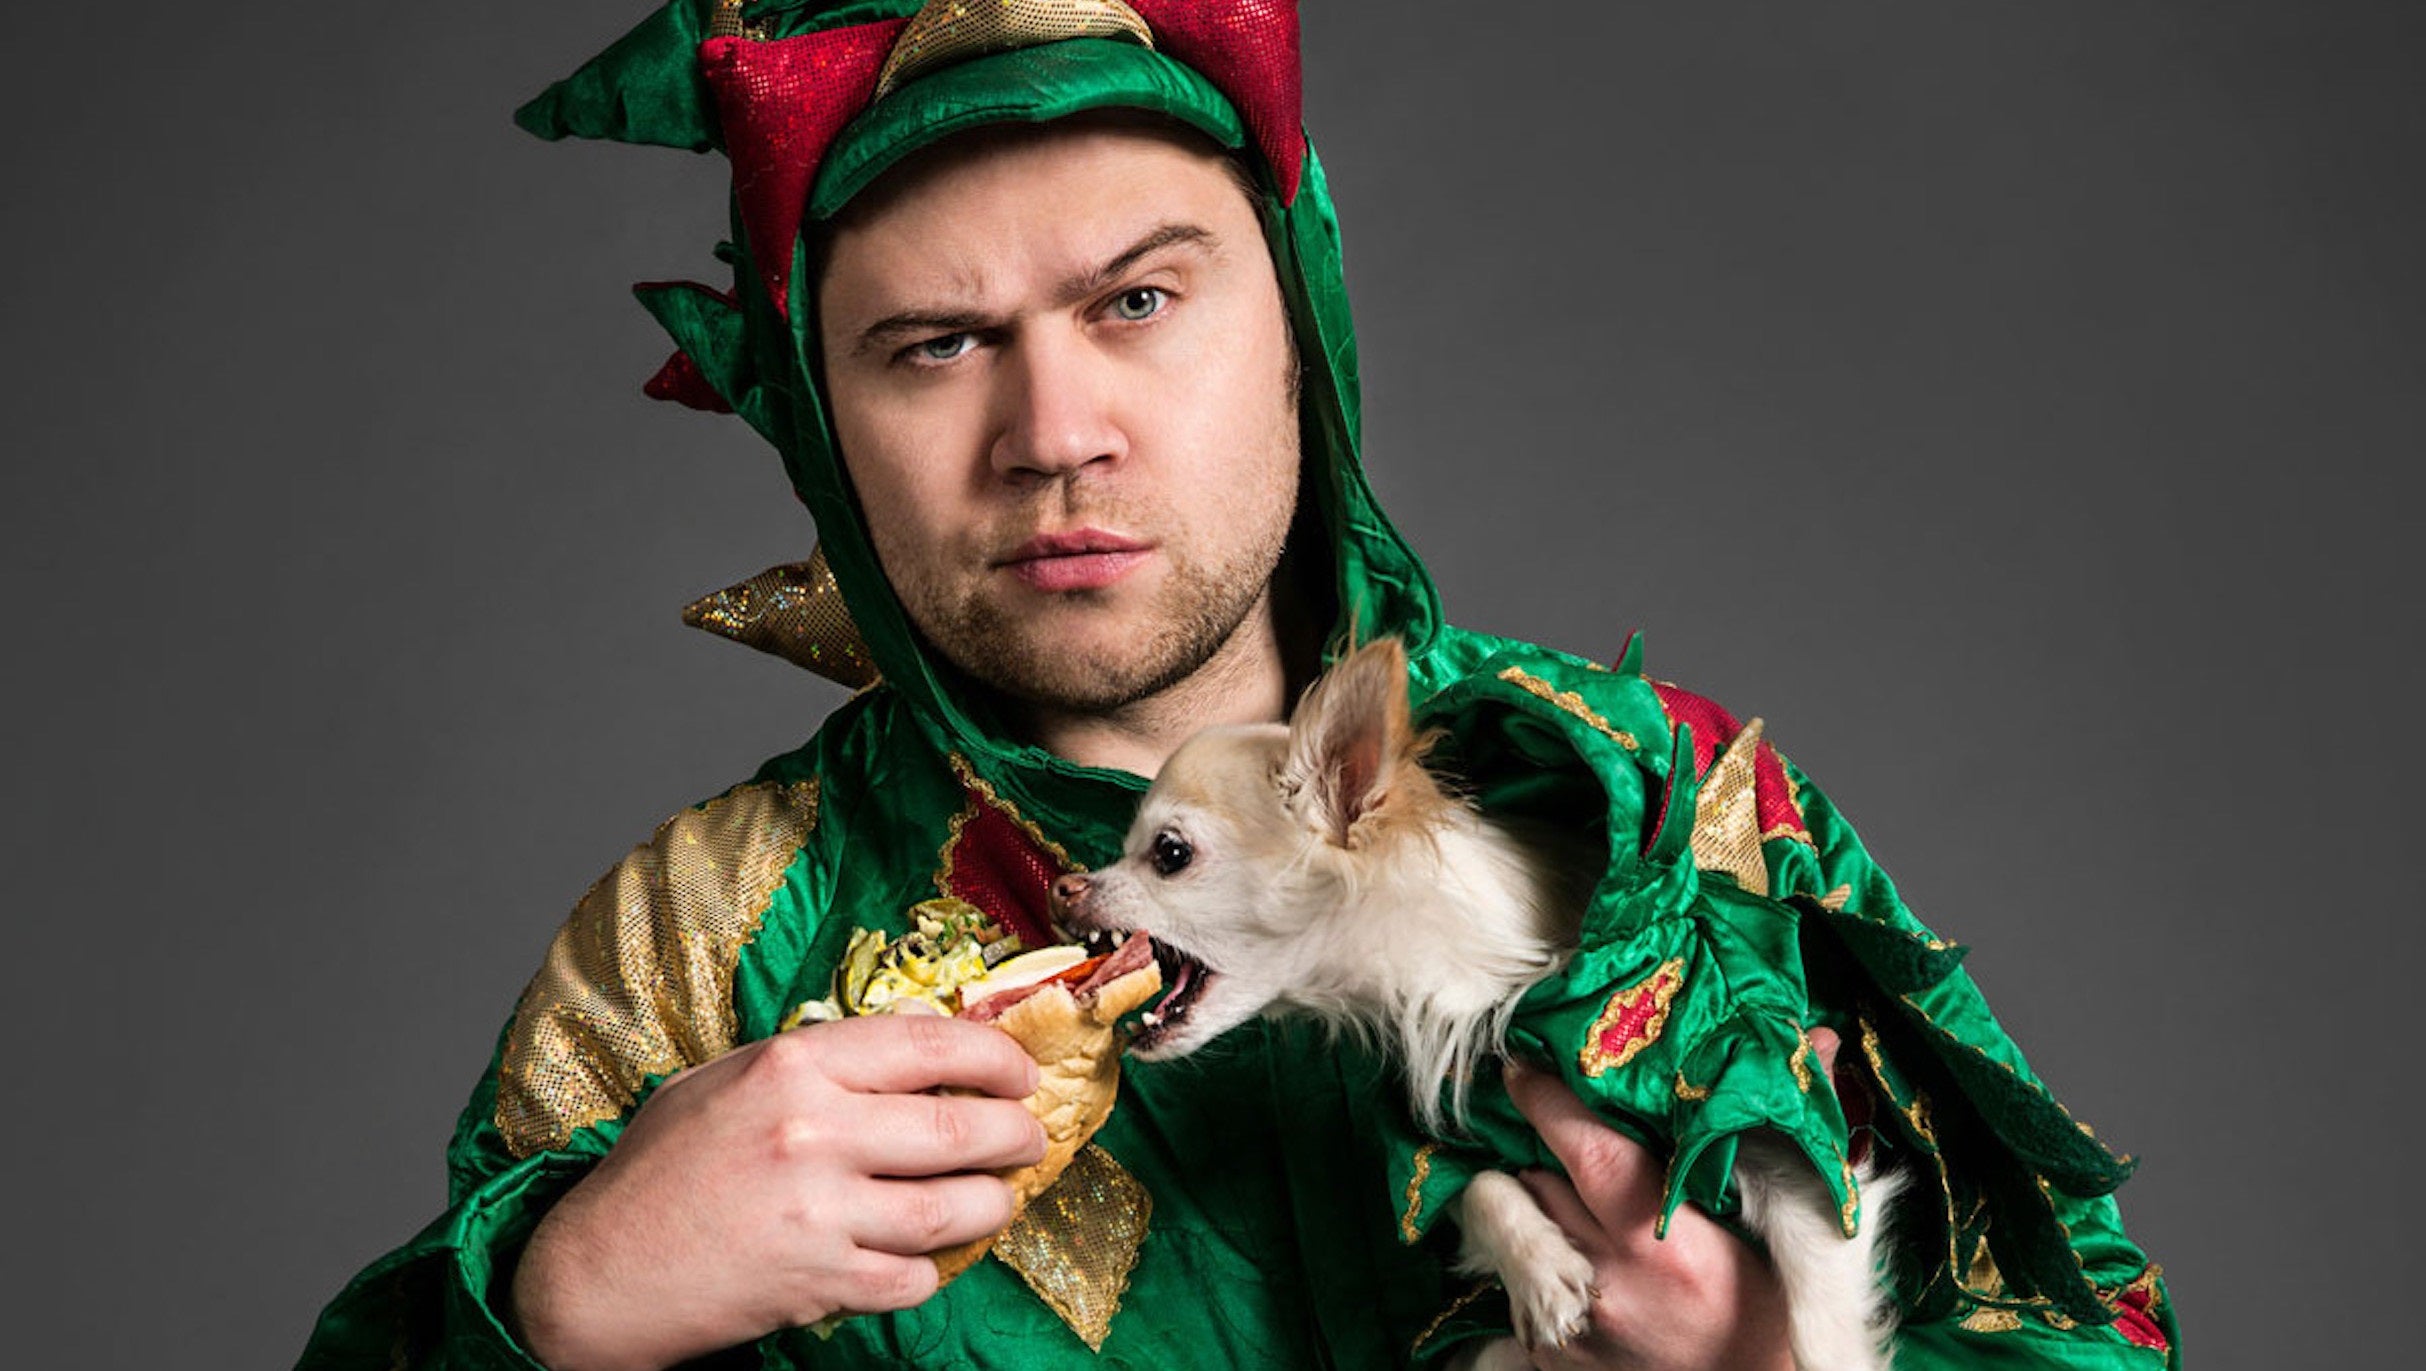 Piff the Magic Dragon in Niagara Falls promo photo for OLG Stage presale offer code